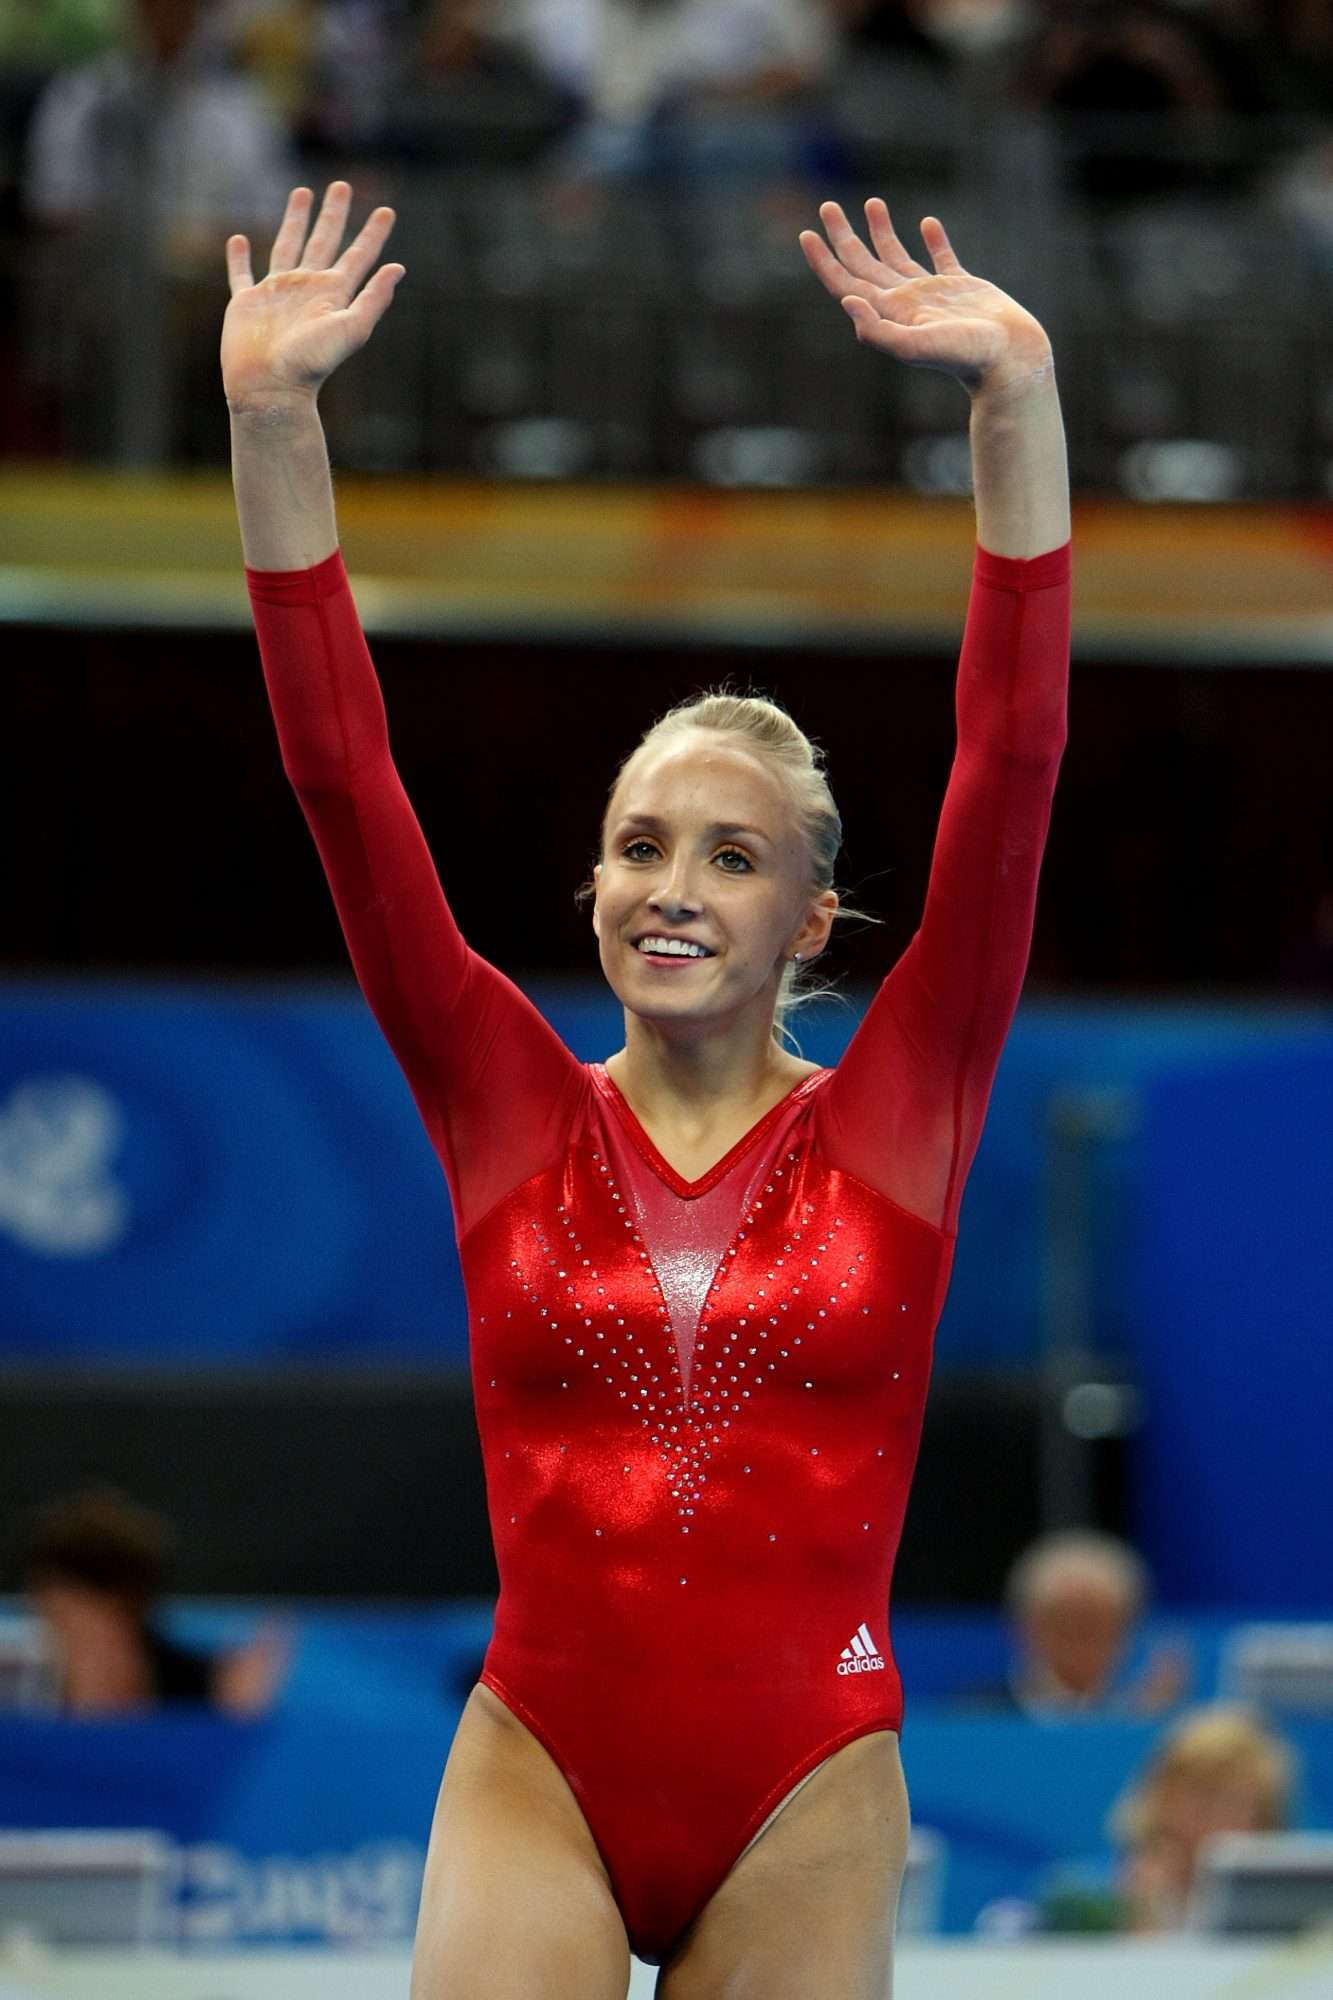 The 2008 Gold Medalist reveals the strict style guidelines every gymnast mu...